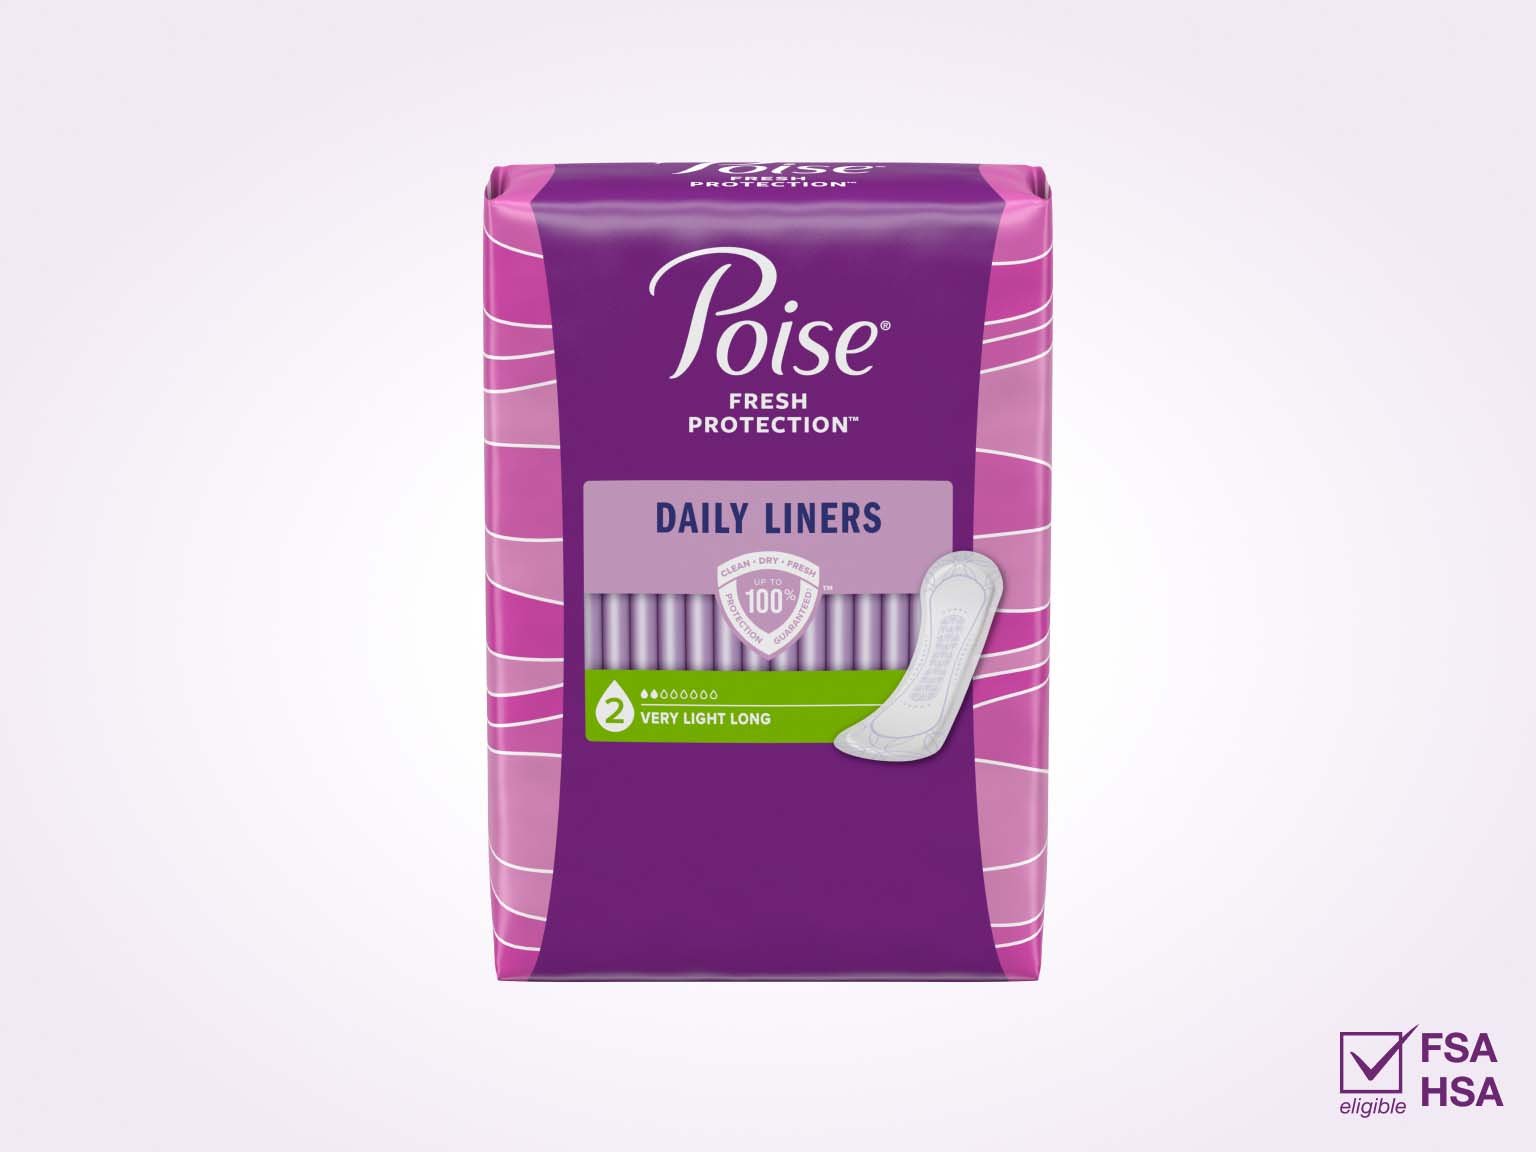 Poise® Daily Liners For Bladder Leaks, 2 Drop Very Light Absorbency, Long Length